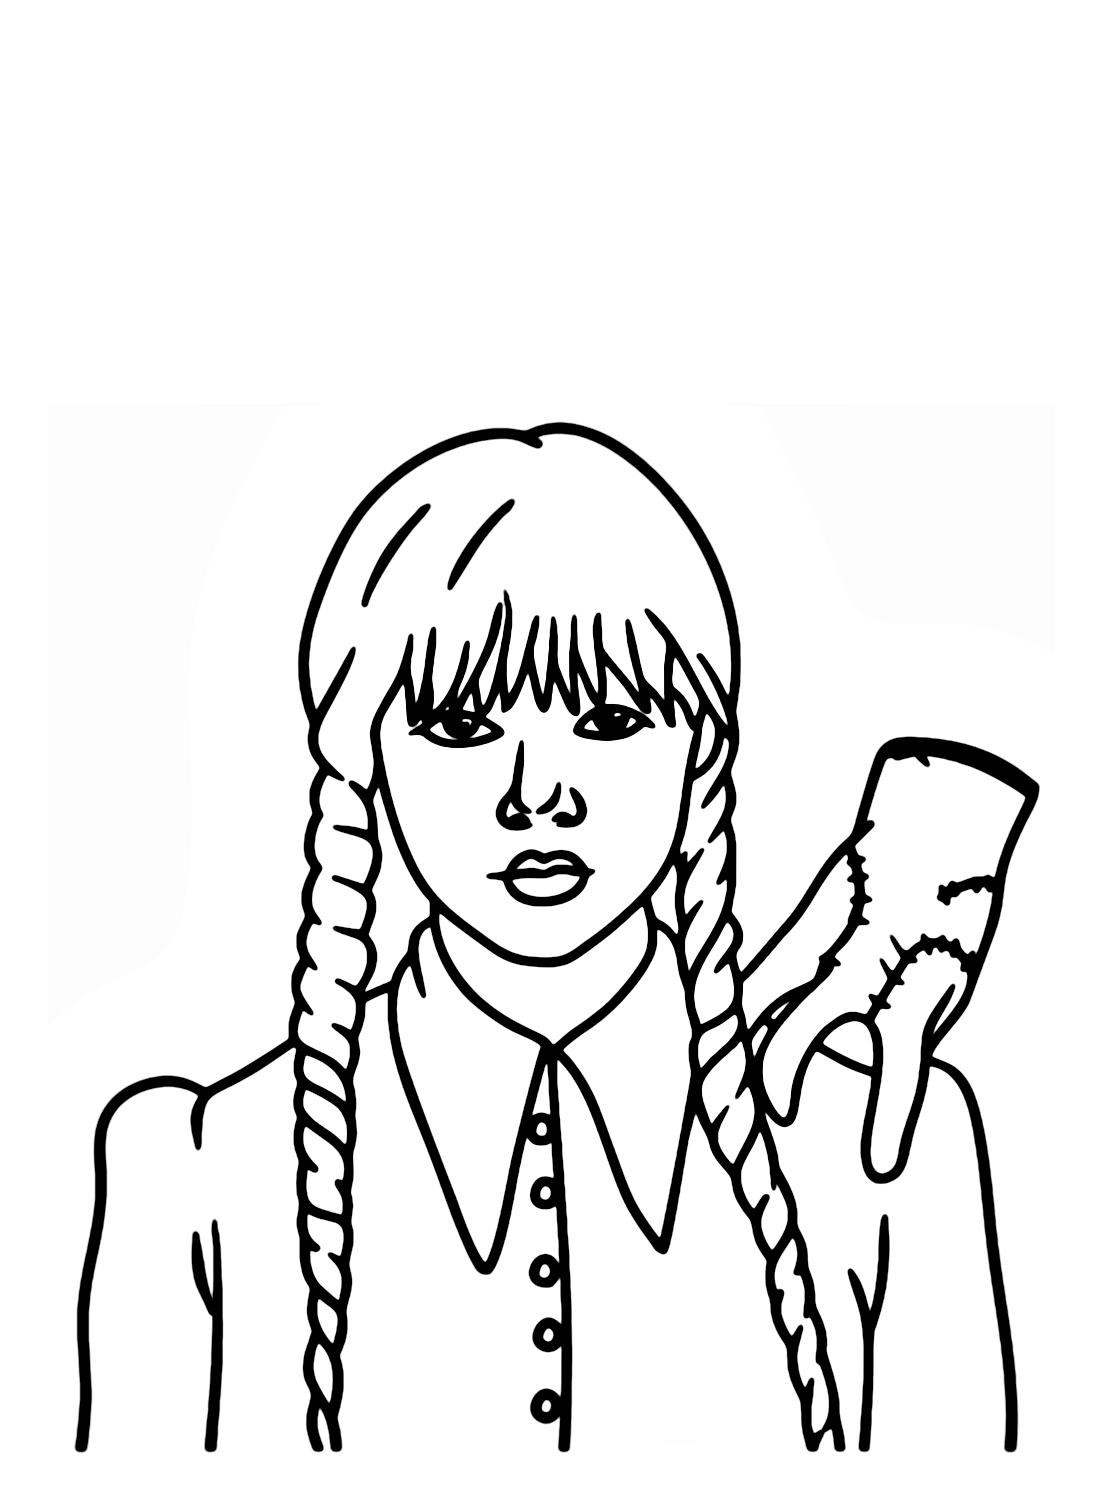 Jenna Ortega as Wednesday Addams Coloring Pages - Wednesday Coloring Pages  - Coloring Pages For Kids And Adults